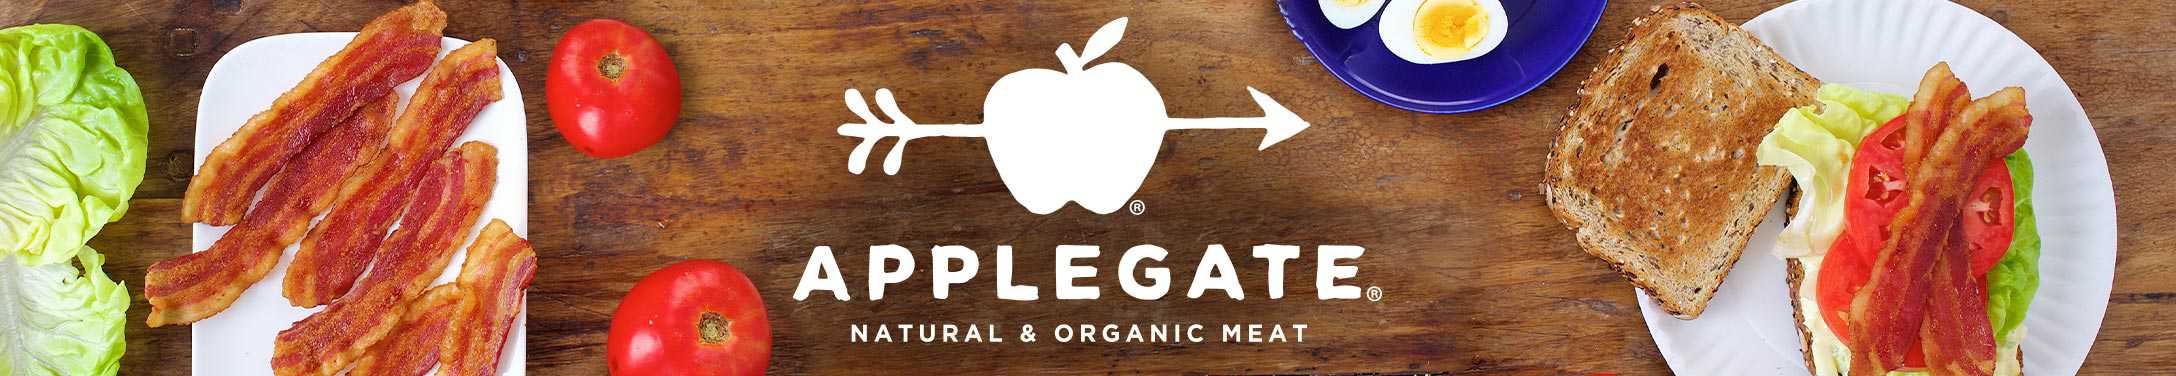 Applegate bacon image with Applegate logo in the center